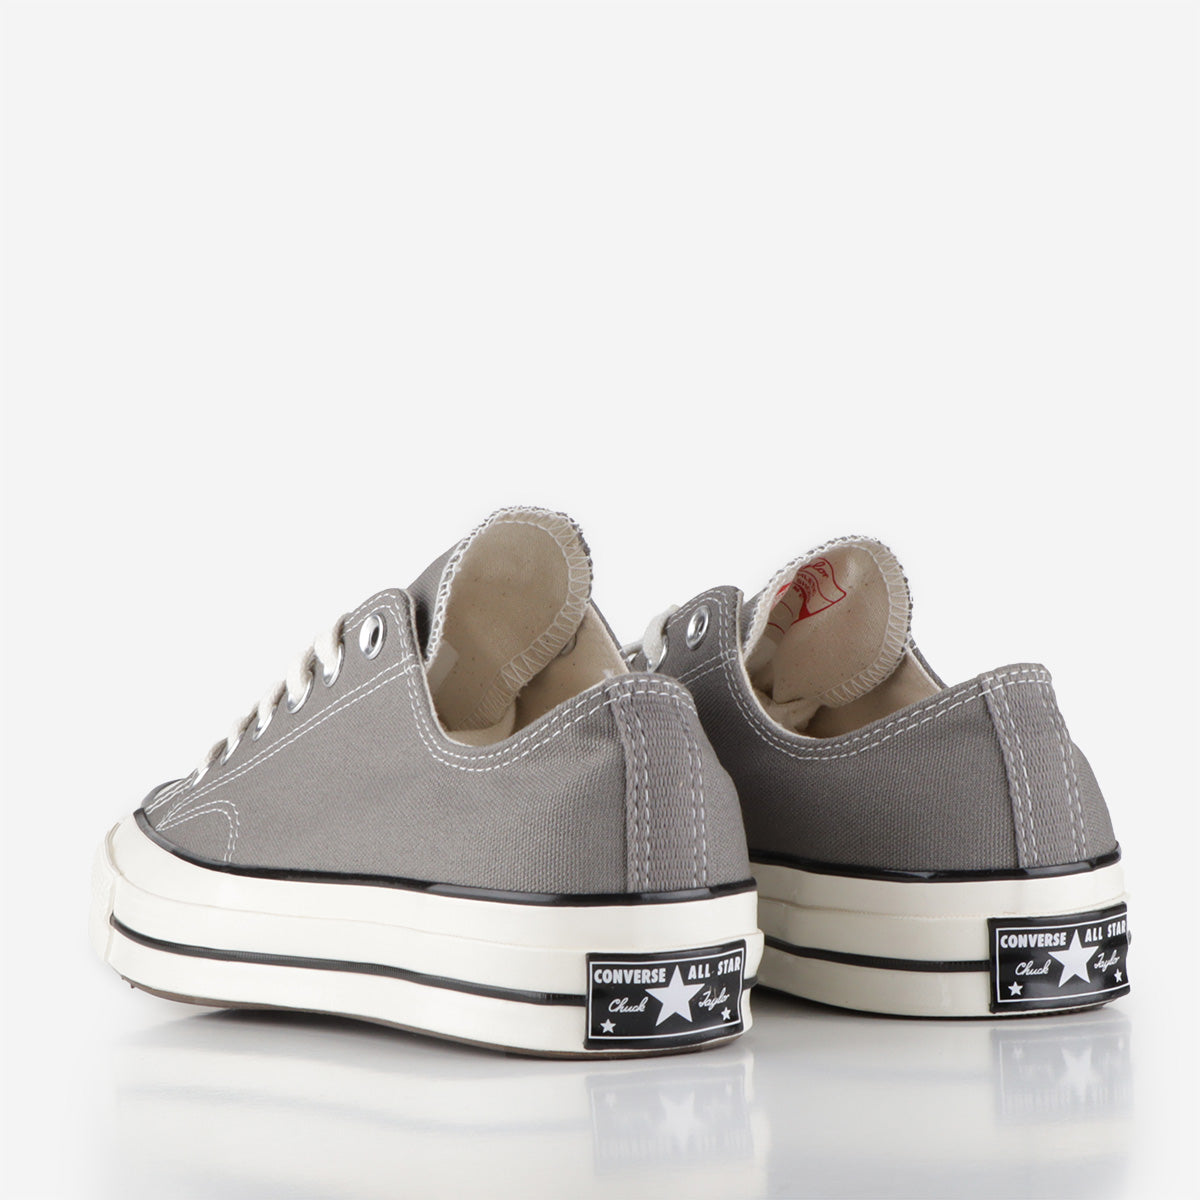 Converse Chuck Taylor All Star 70 Ox Shoes